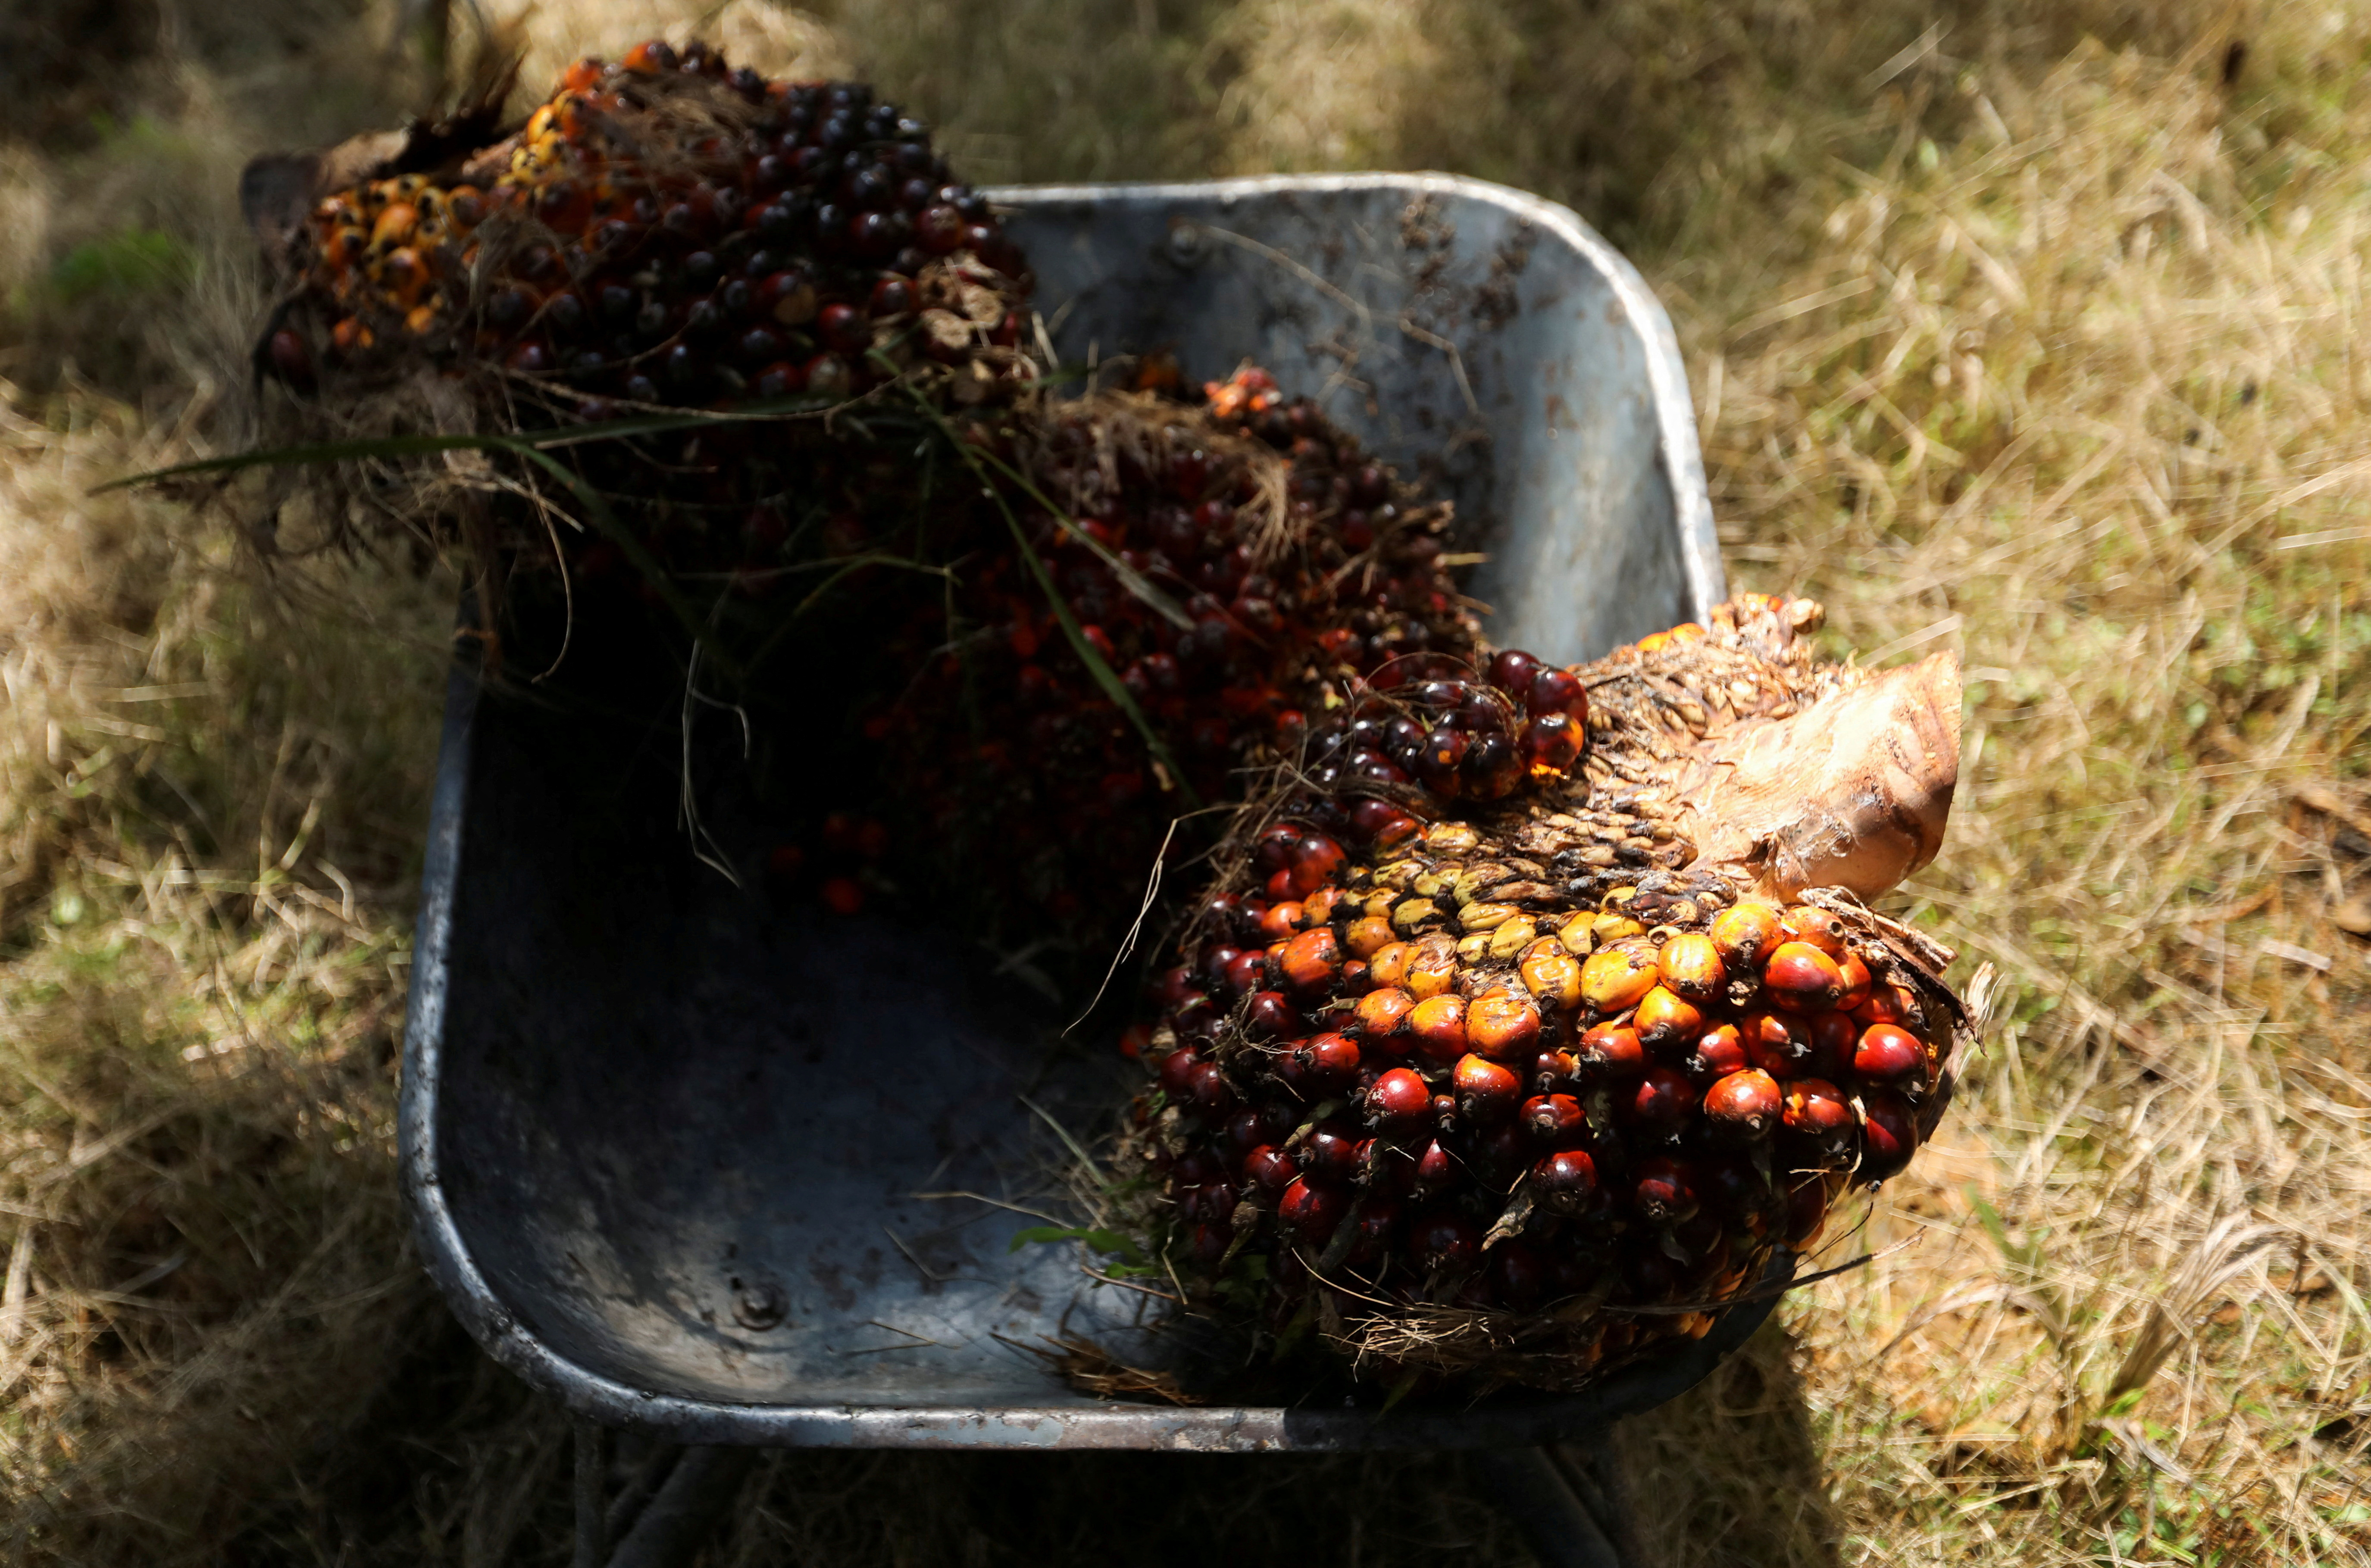 Fresh fruit bunches of oil palm tree are are seen inside a wheelbarrow at a palm oil plantation in Kuala Selangor